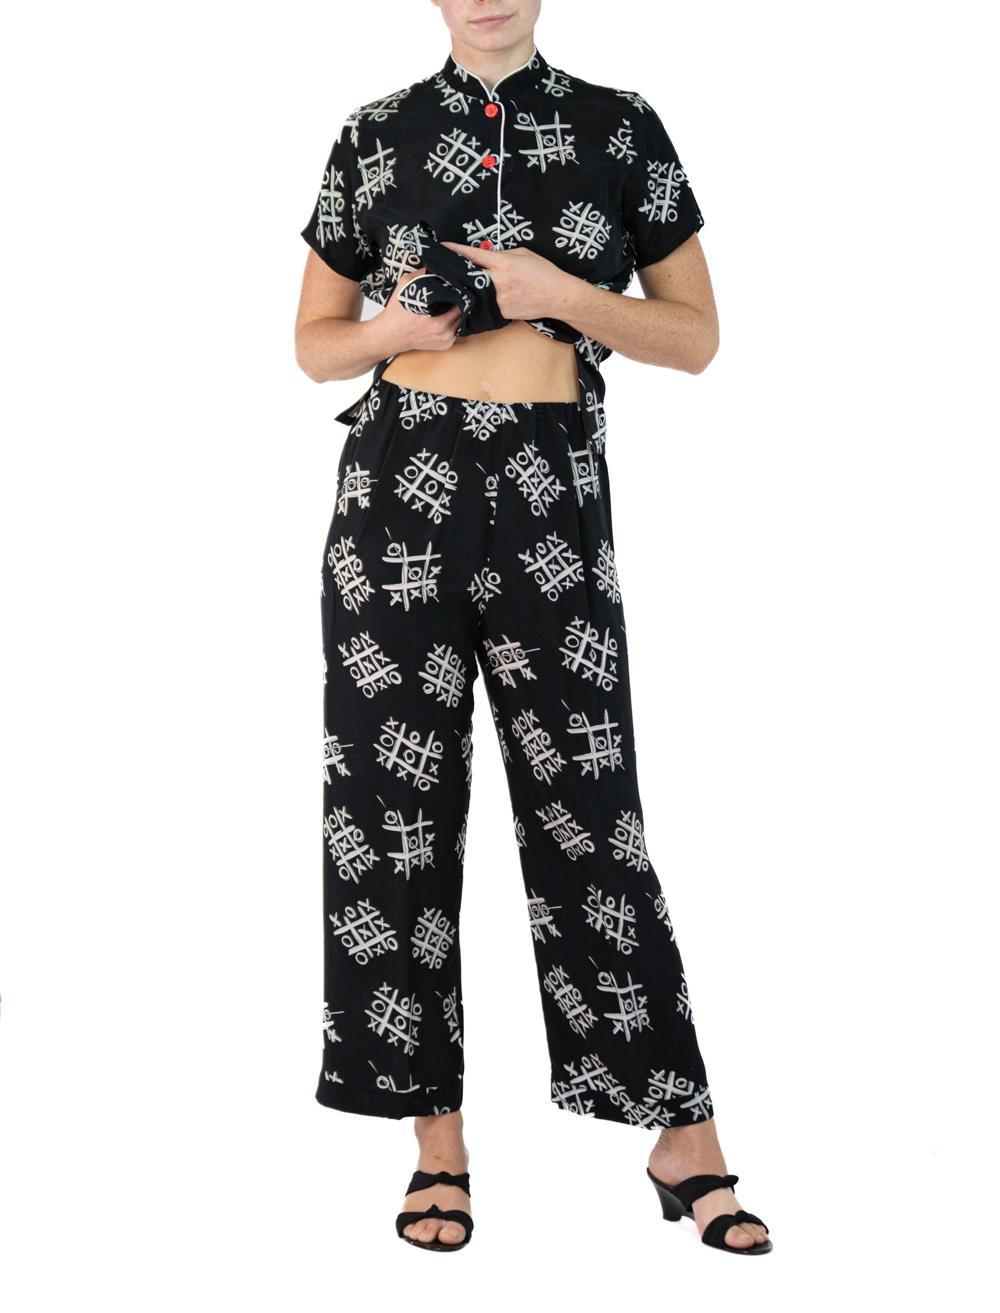 Morphew Collection Black & White Tic Tac Toe Novelty Print Cold Rayon Bias Paja For Sale 5